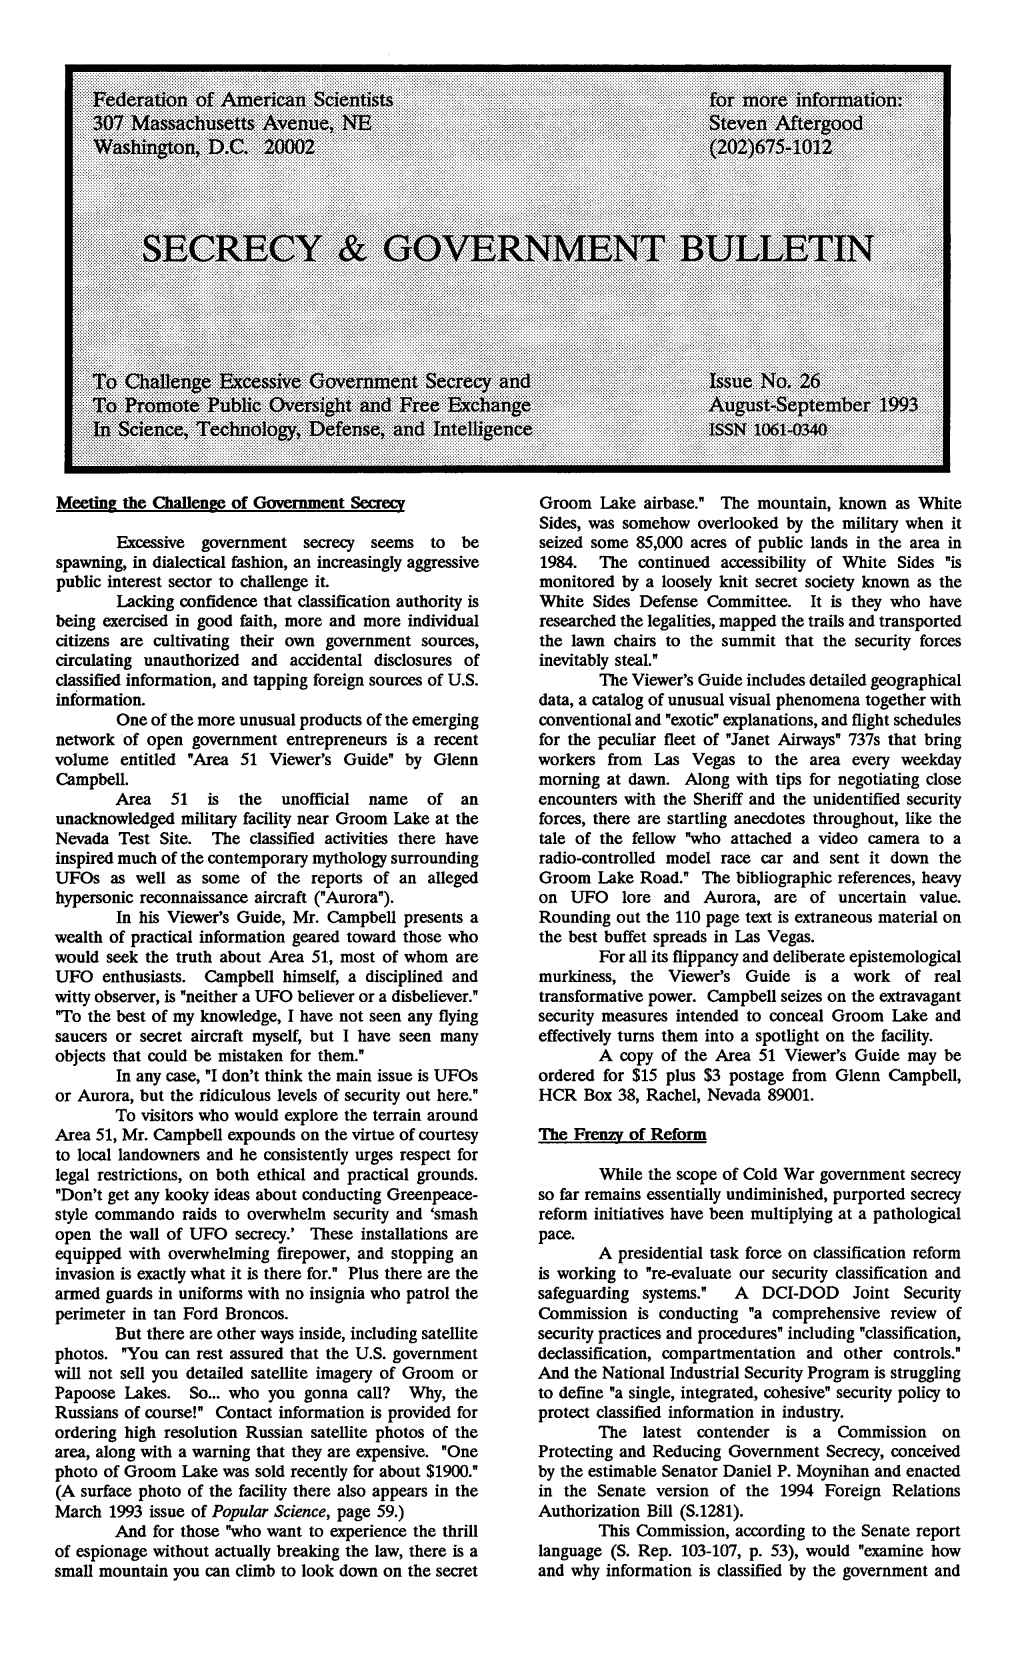 Secrecy & Government Bulletin, Issue No. 26, August-September 1993